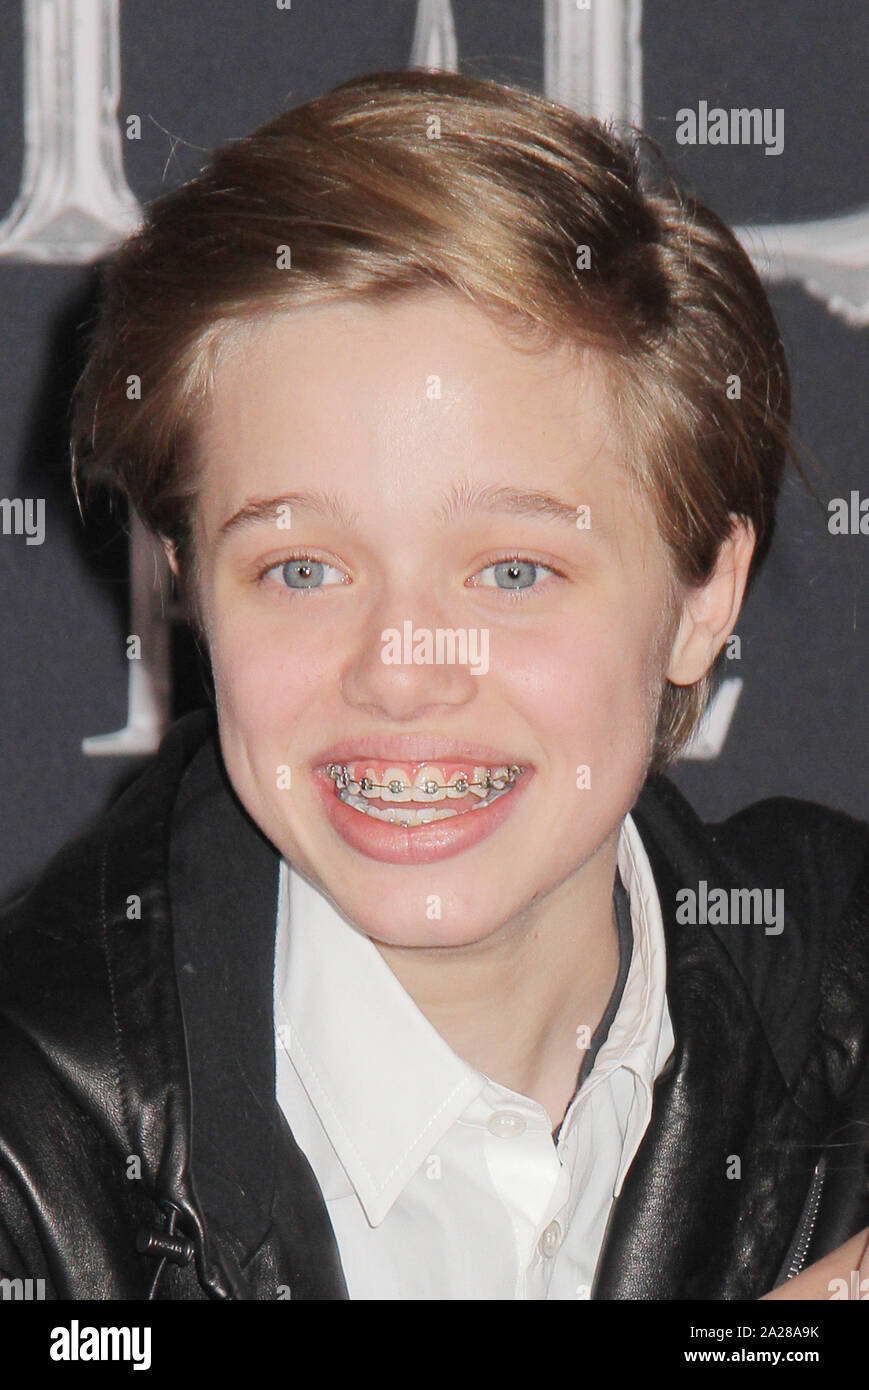 los-angeles-usa-30th-sep-2019-shiloh-nouvel-jolie-pitt-09302019-the-world-premiere-of-maleficent-mistress-of-evil-held-at-the-el-capitantheatre-in-los-angeles-ca-credit-cronosalamy-live-news-2A28A9K.jpg